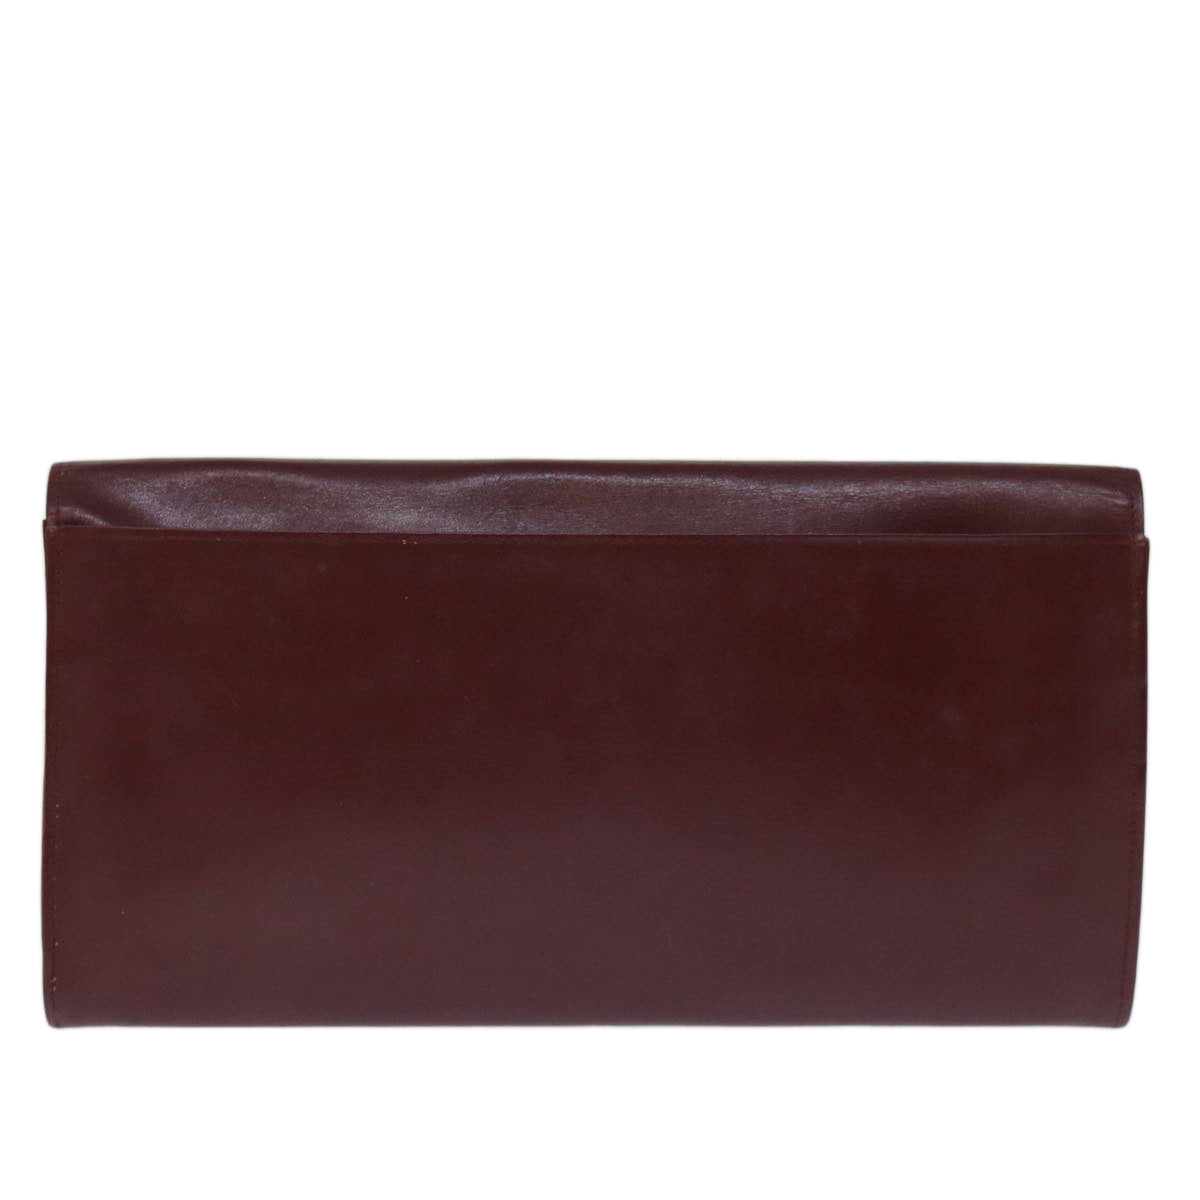 CARTIER Clutch Bag Leather Wine Red Auth bs14298 - 0